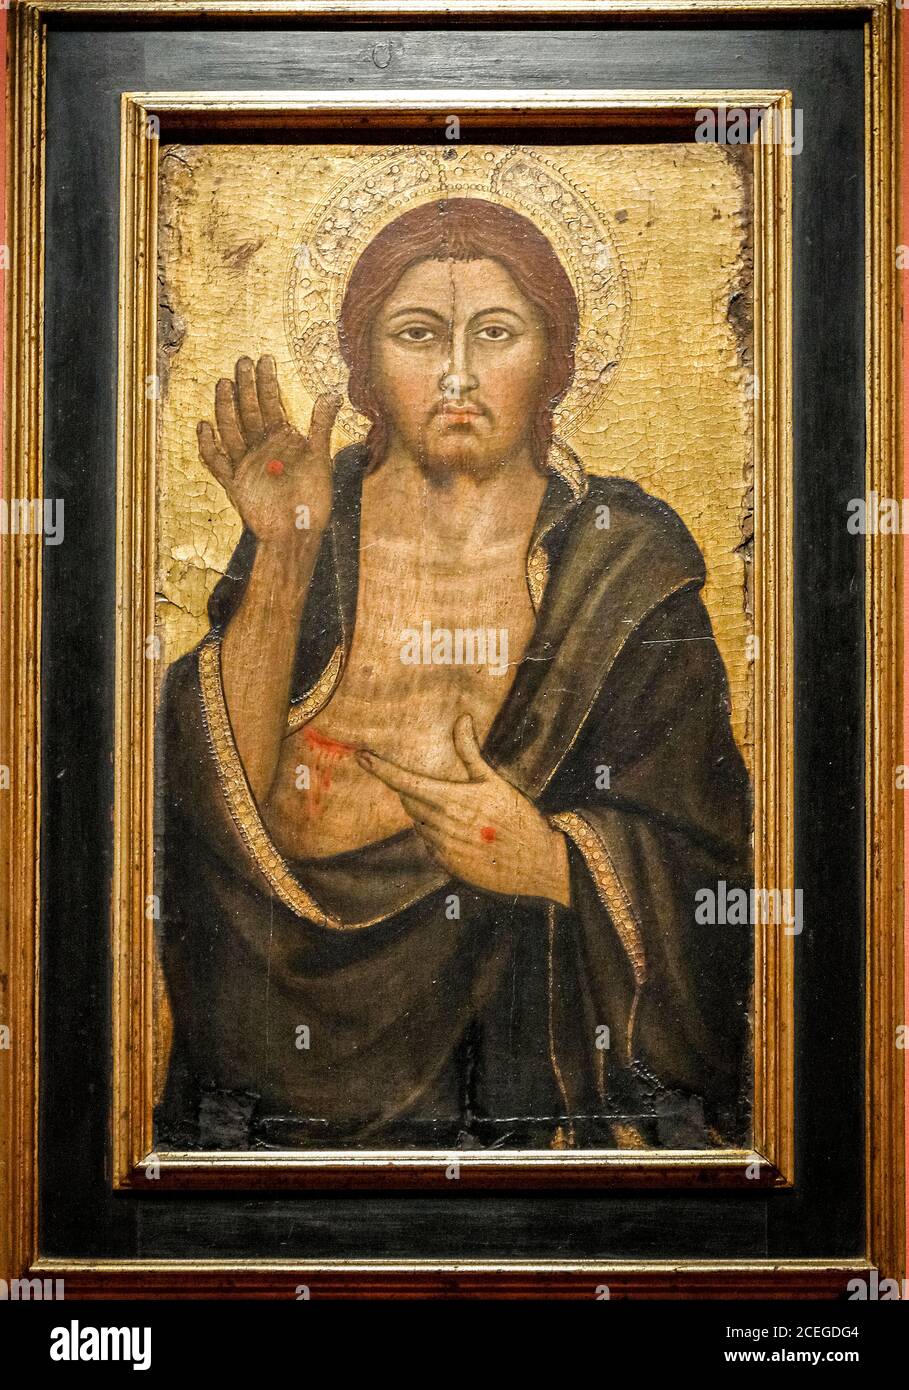 Italy Umbria Perugia - National Gallery of Umbria: Monographic Exhibition  (1362-1422) -  Central cusp. Blessed Redeemer Stock Photo